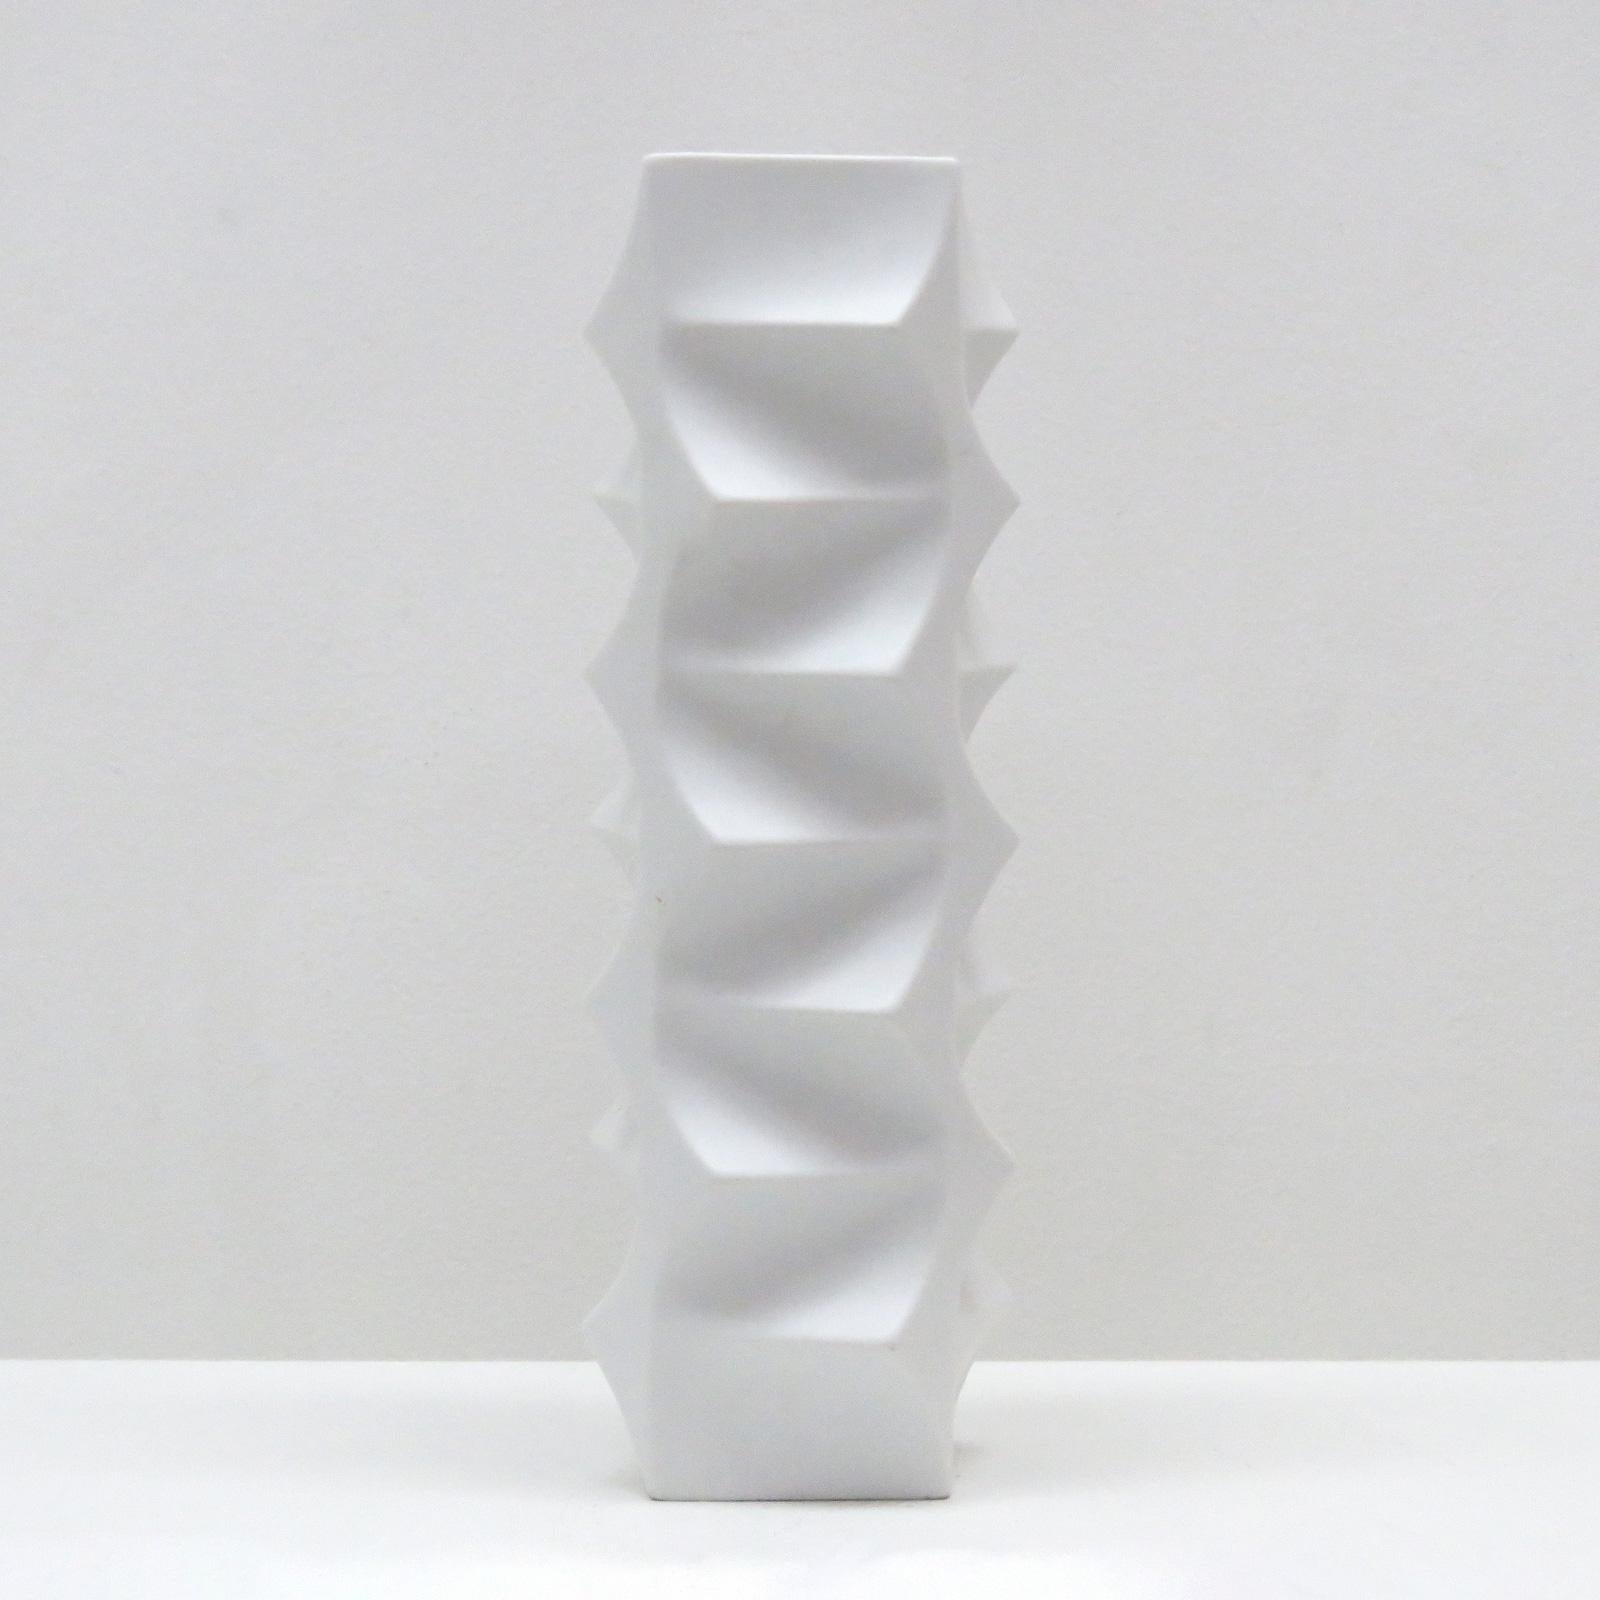 Sculptural porcelain vase by Heinrich Fuchs for Hutschenreuther, released between 1968 and 1970, large version model 5089/34, matte exterior, gloss interior, marked.